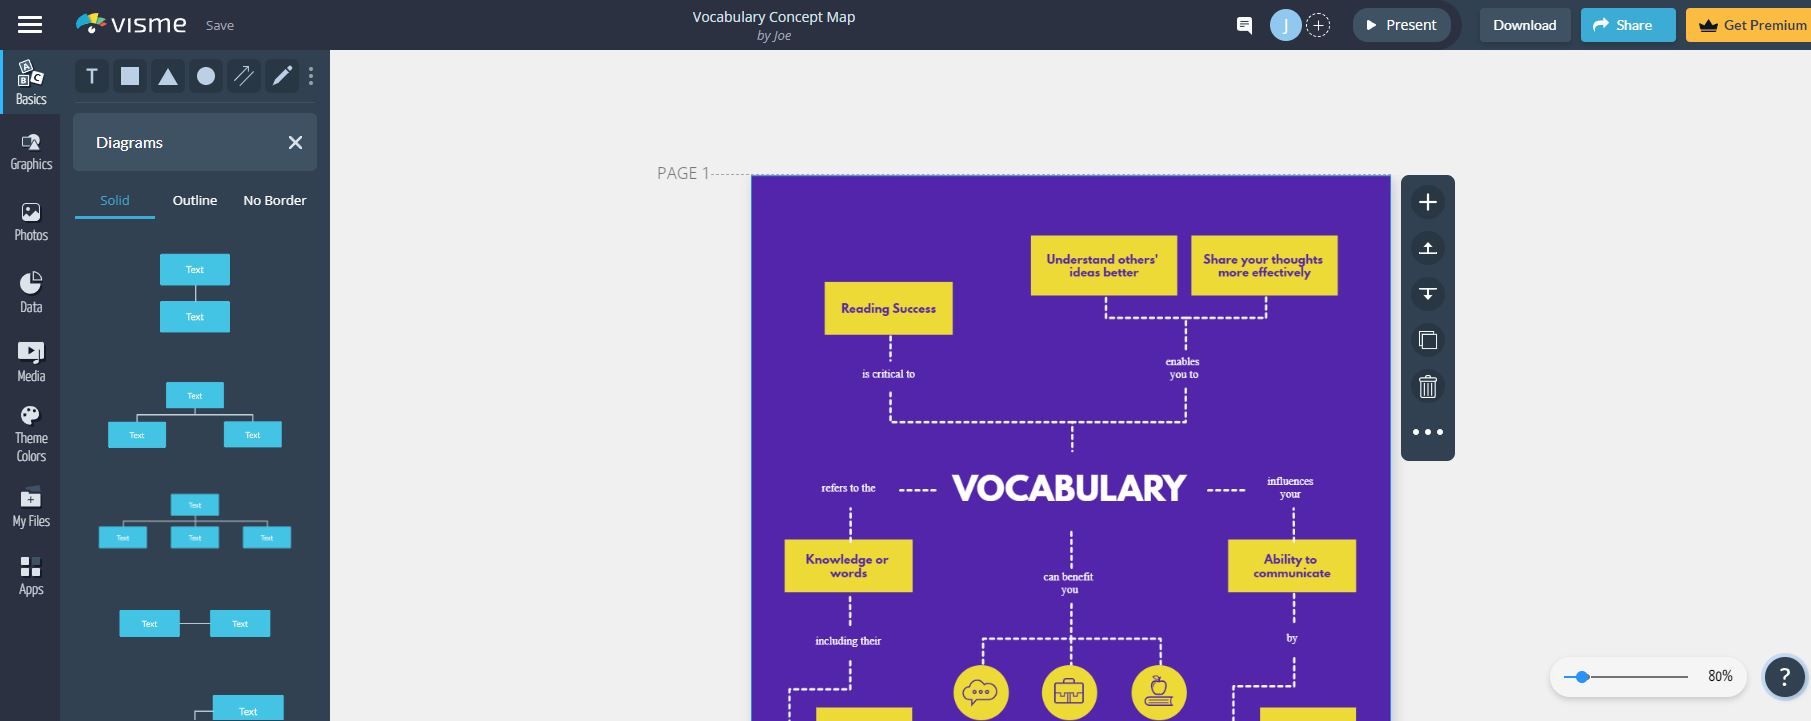 A Screenshot of the Visme Free Online Mind Map Creator in Use